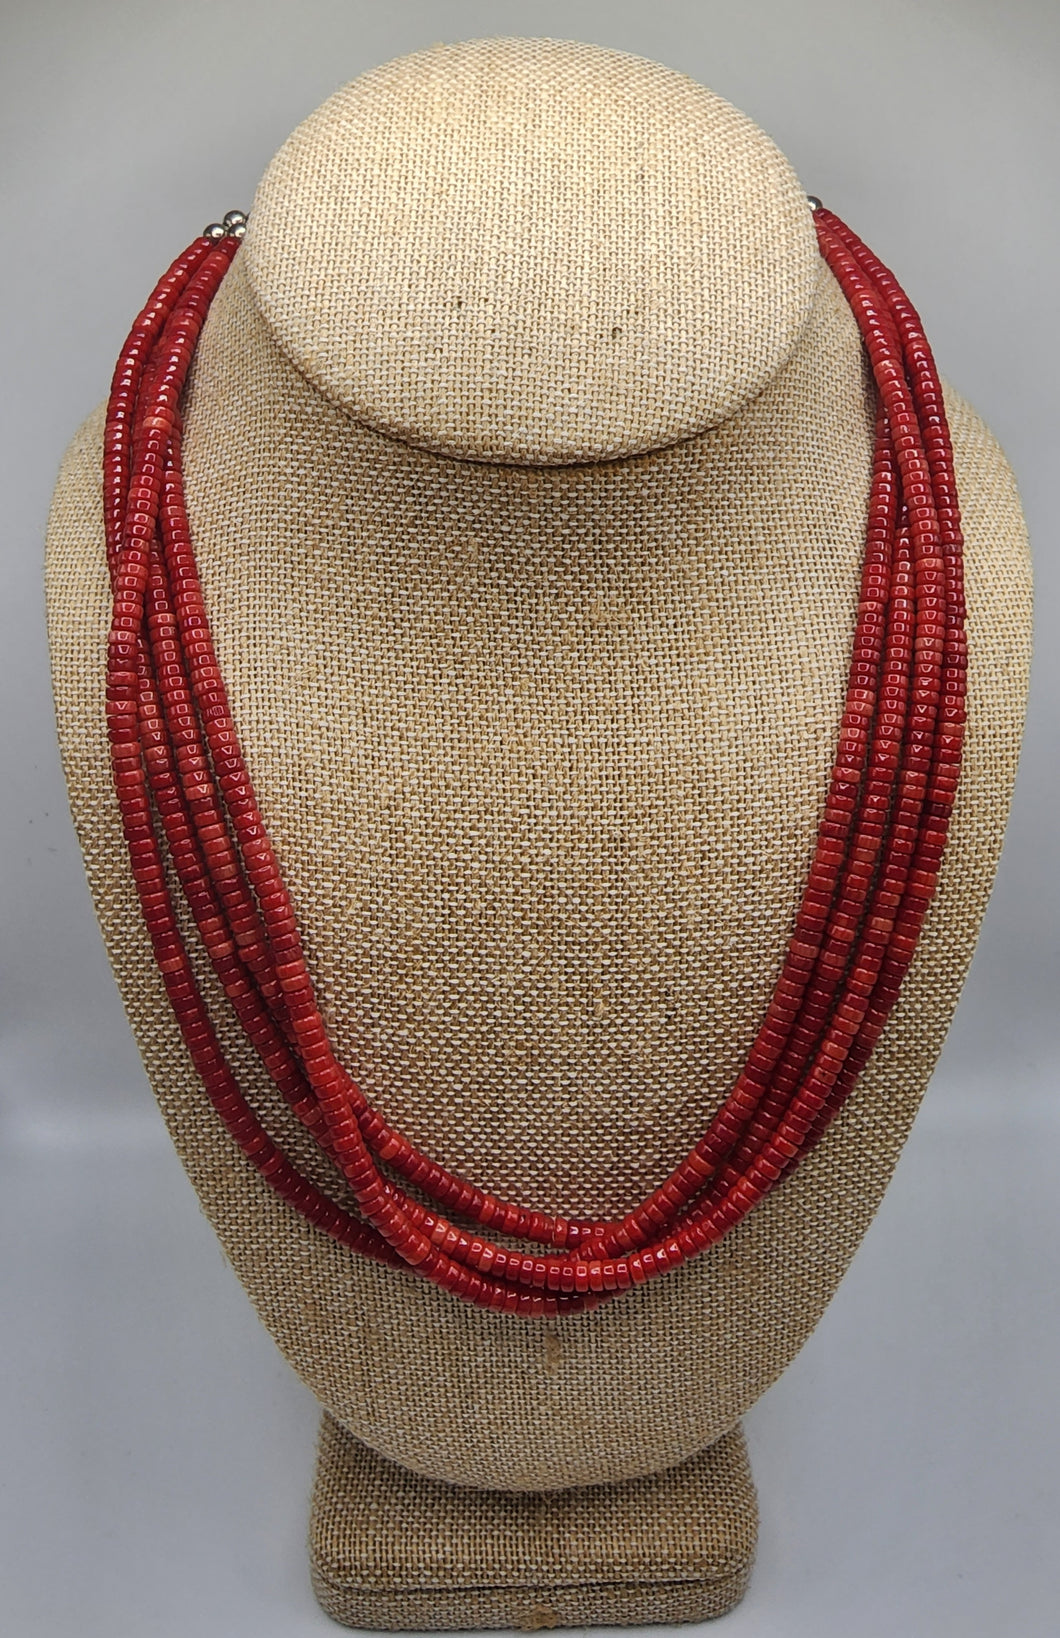 Four Stranded Red Coral Heishi Bead Necklace Trimmed in Sterling Silver With Adjustable Clasp